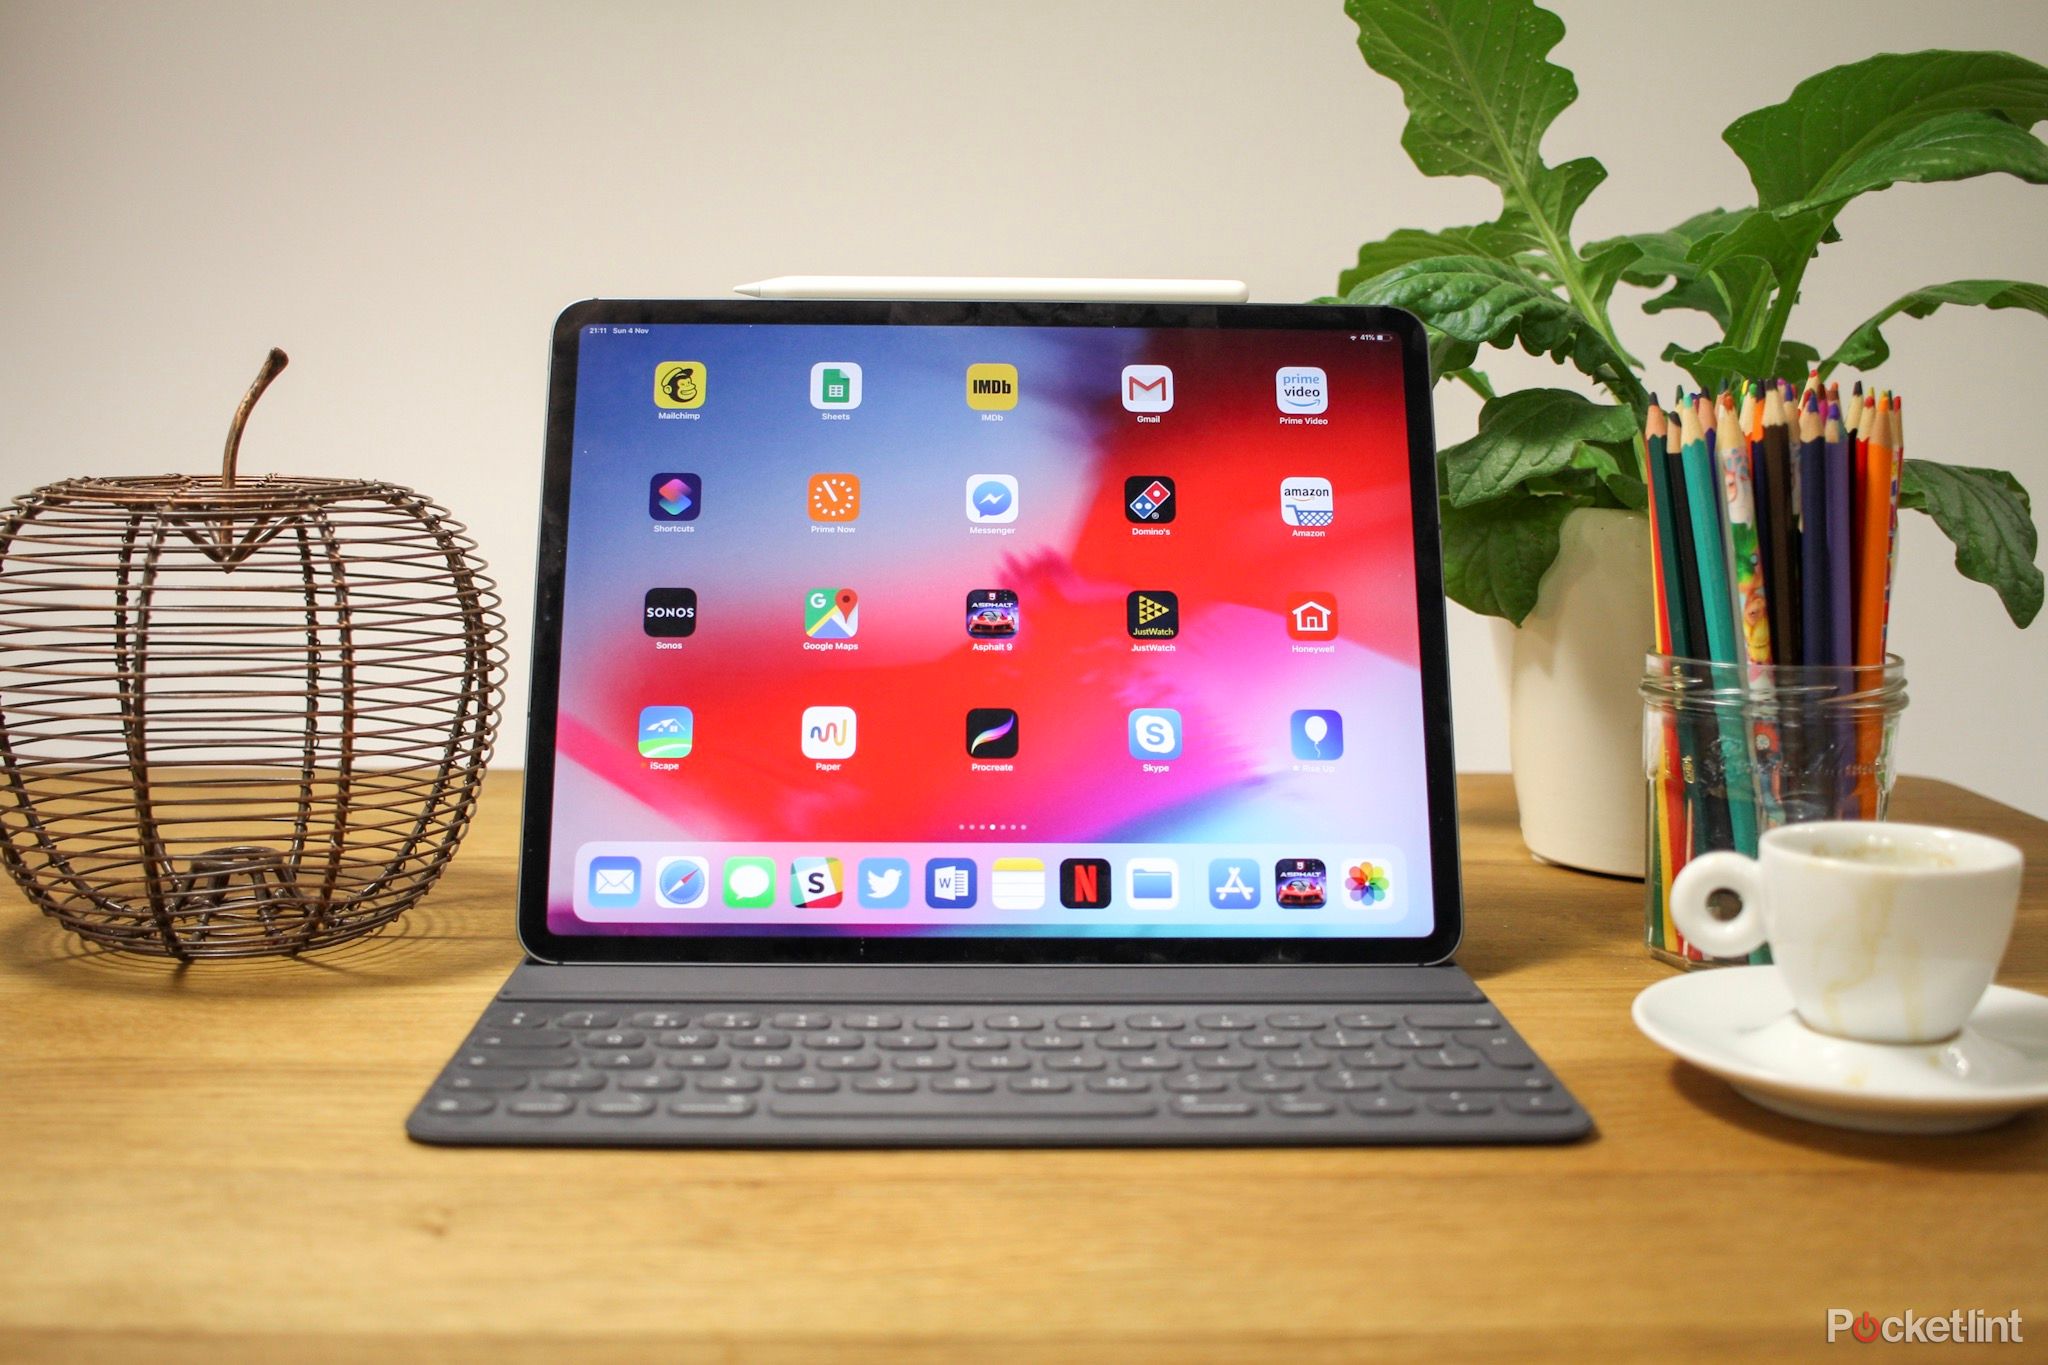 iOS 14 points to more advanced cursor support and new iPad keyboards image 1